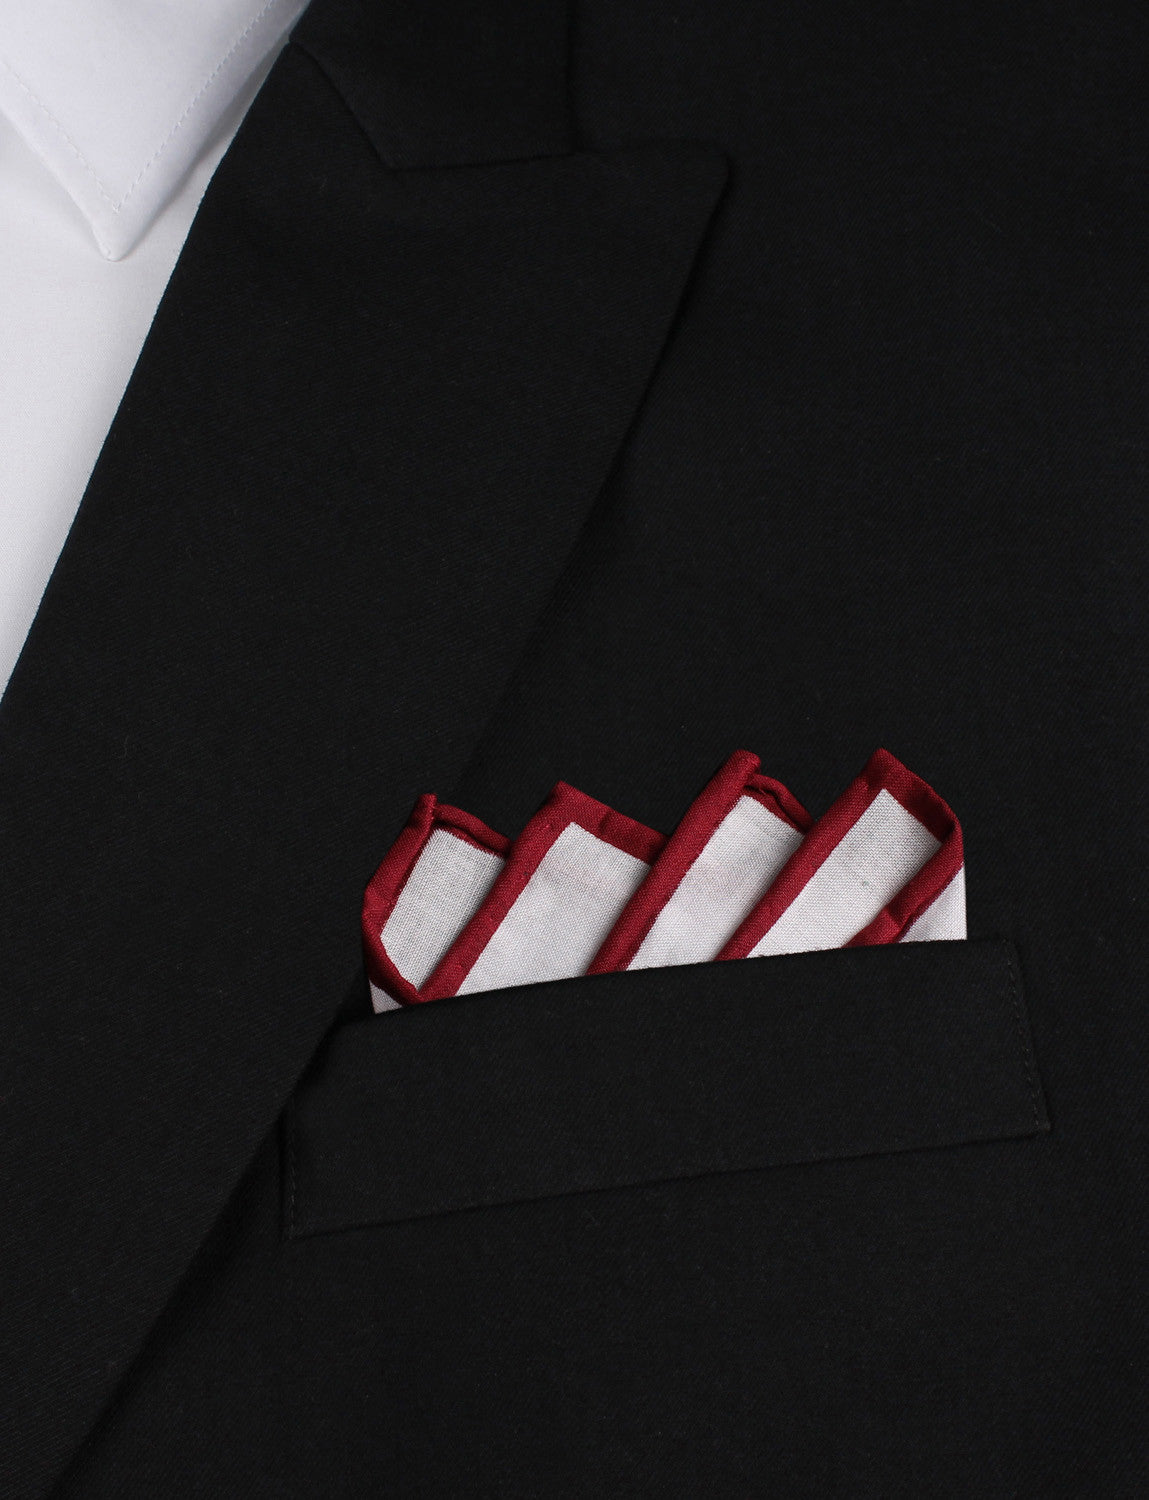 White Cotton Pocket Square with Maroon Border Point Fold